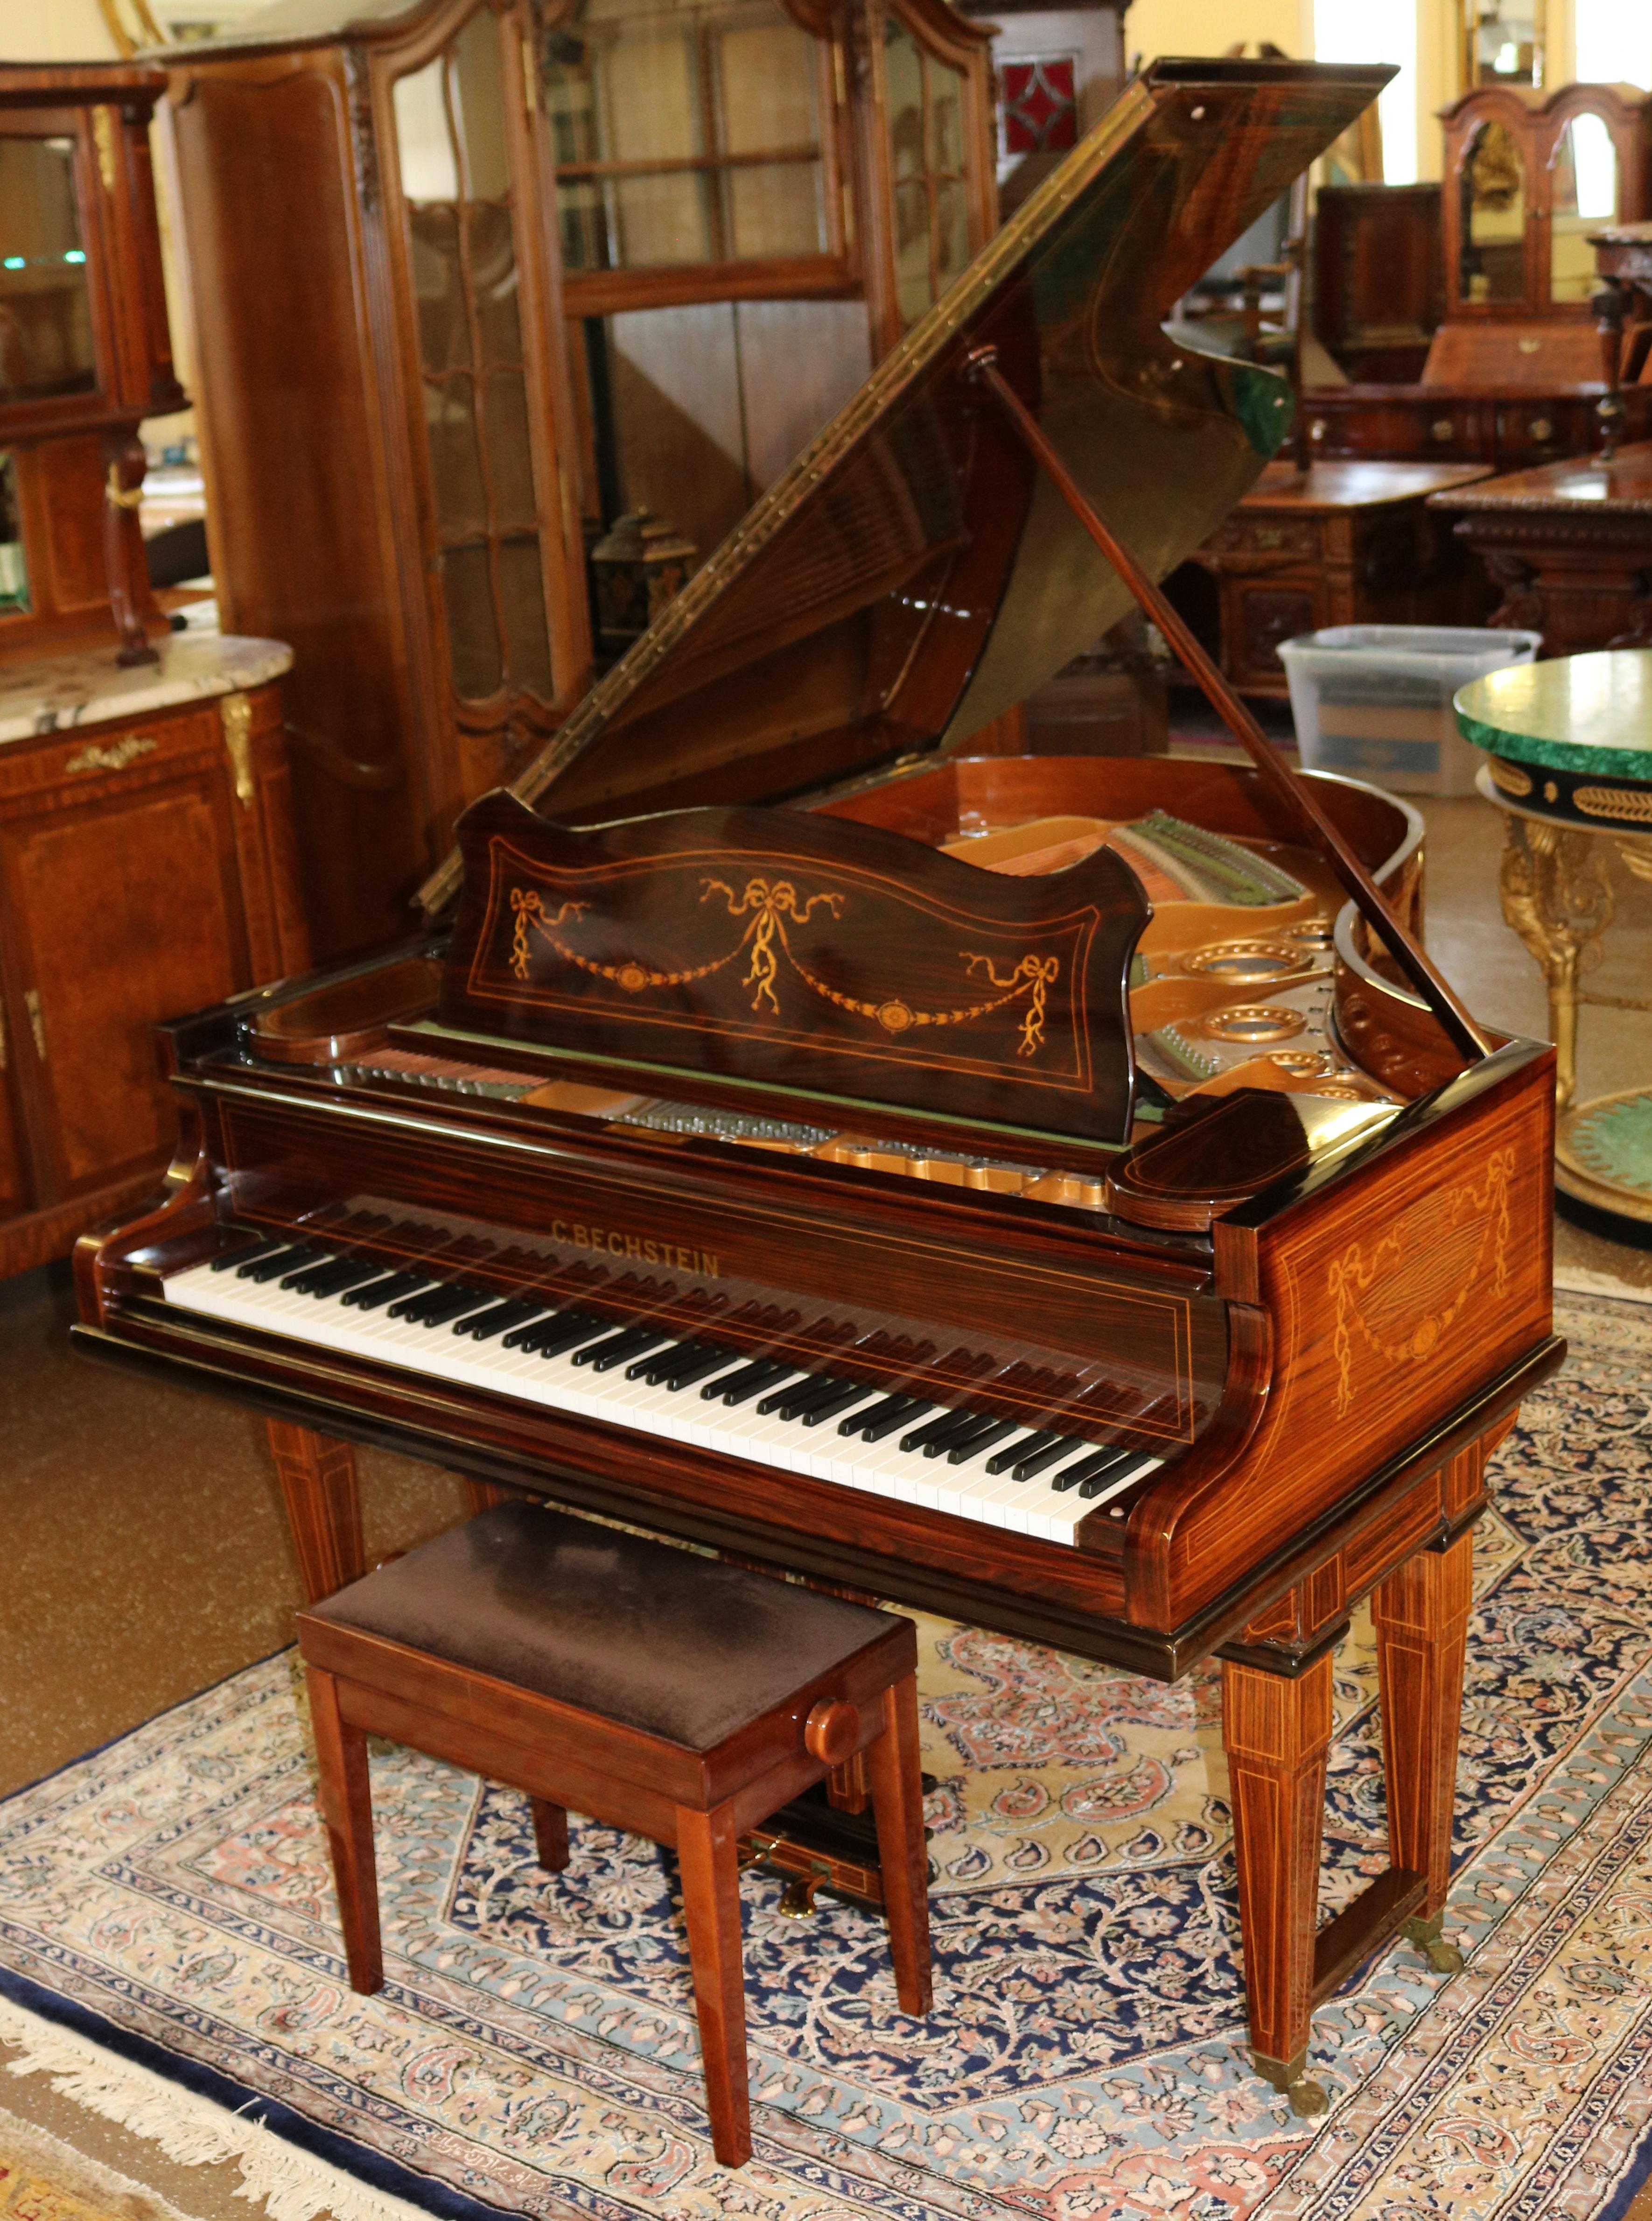 This piano was made by C. Bechstein one of the finest piano makers of all time in Berlin in the early 20th Century. The piano is made of rosewood and is masterfully inlaid with satinwood in the adams style. The grain is absolutely stunning! The